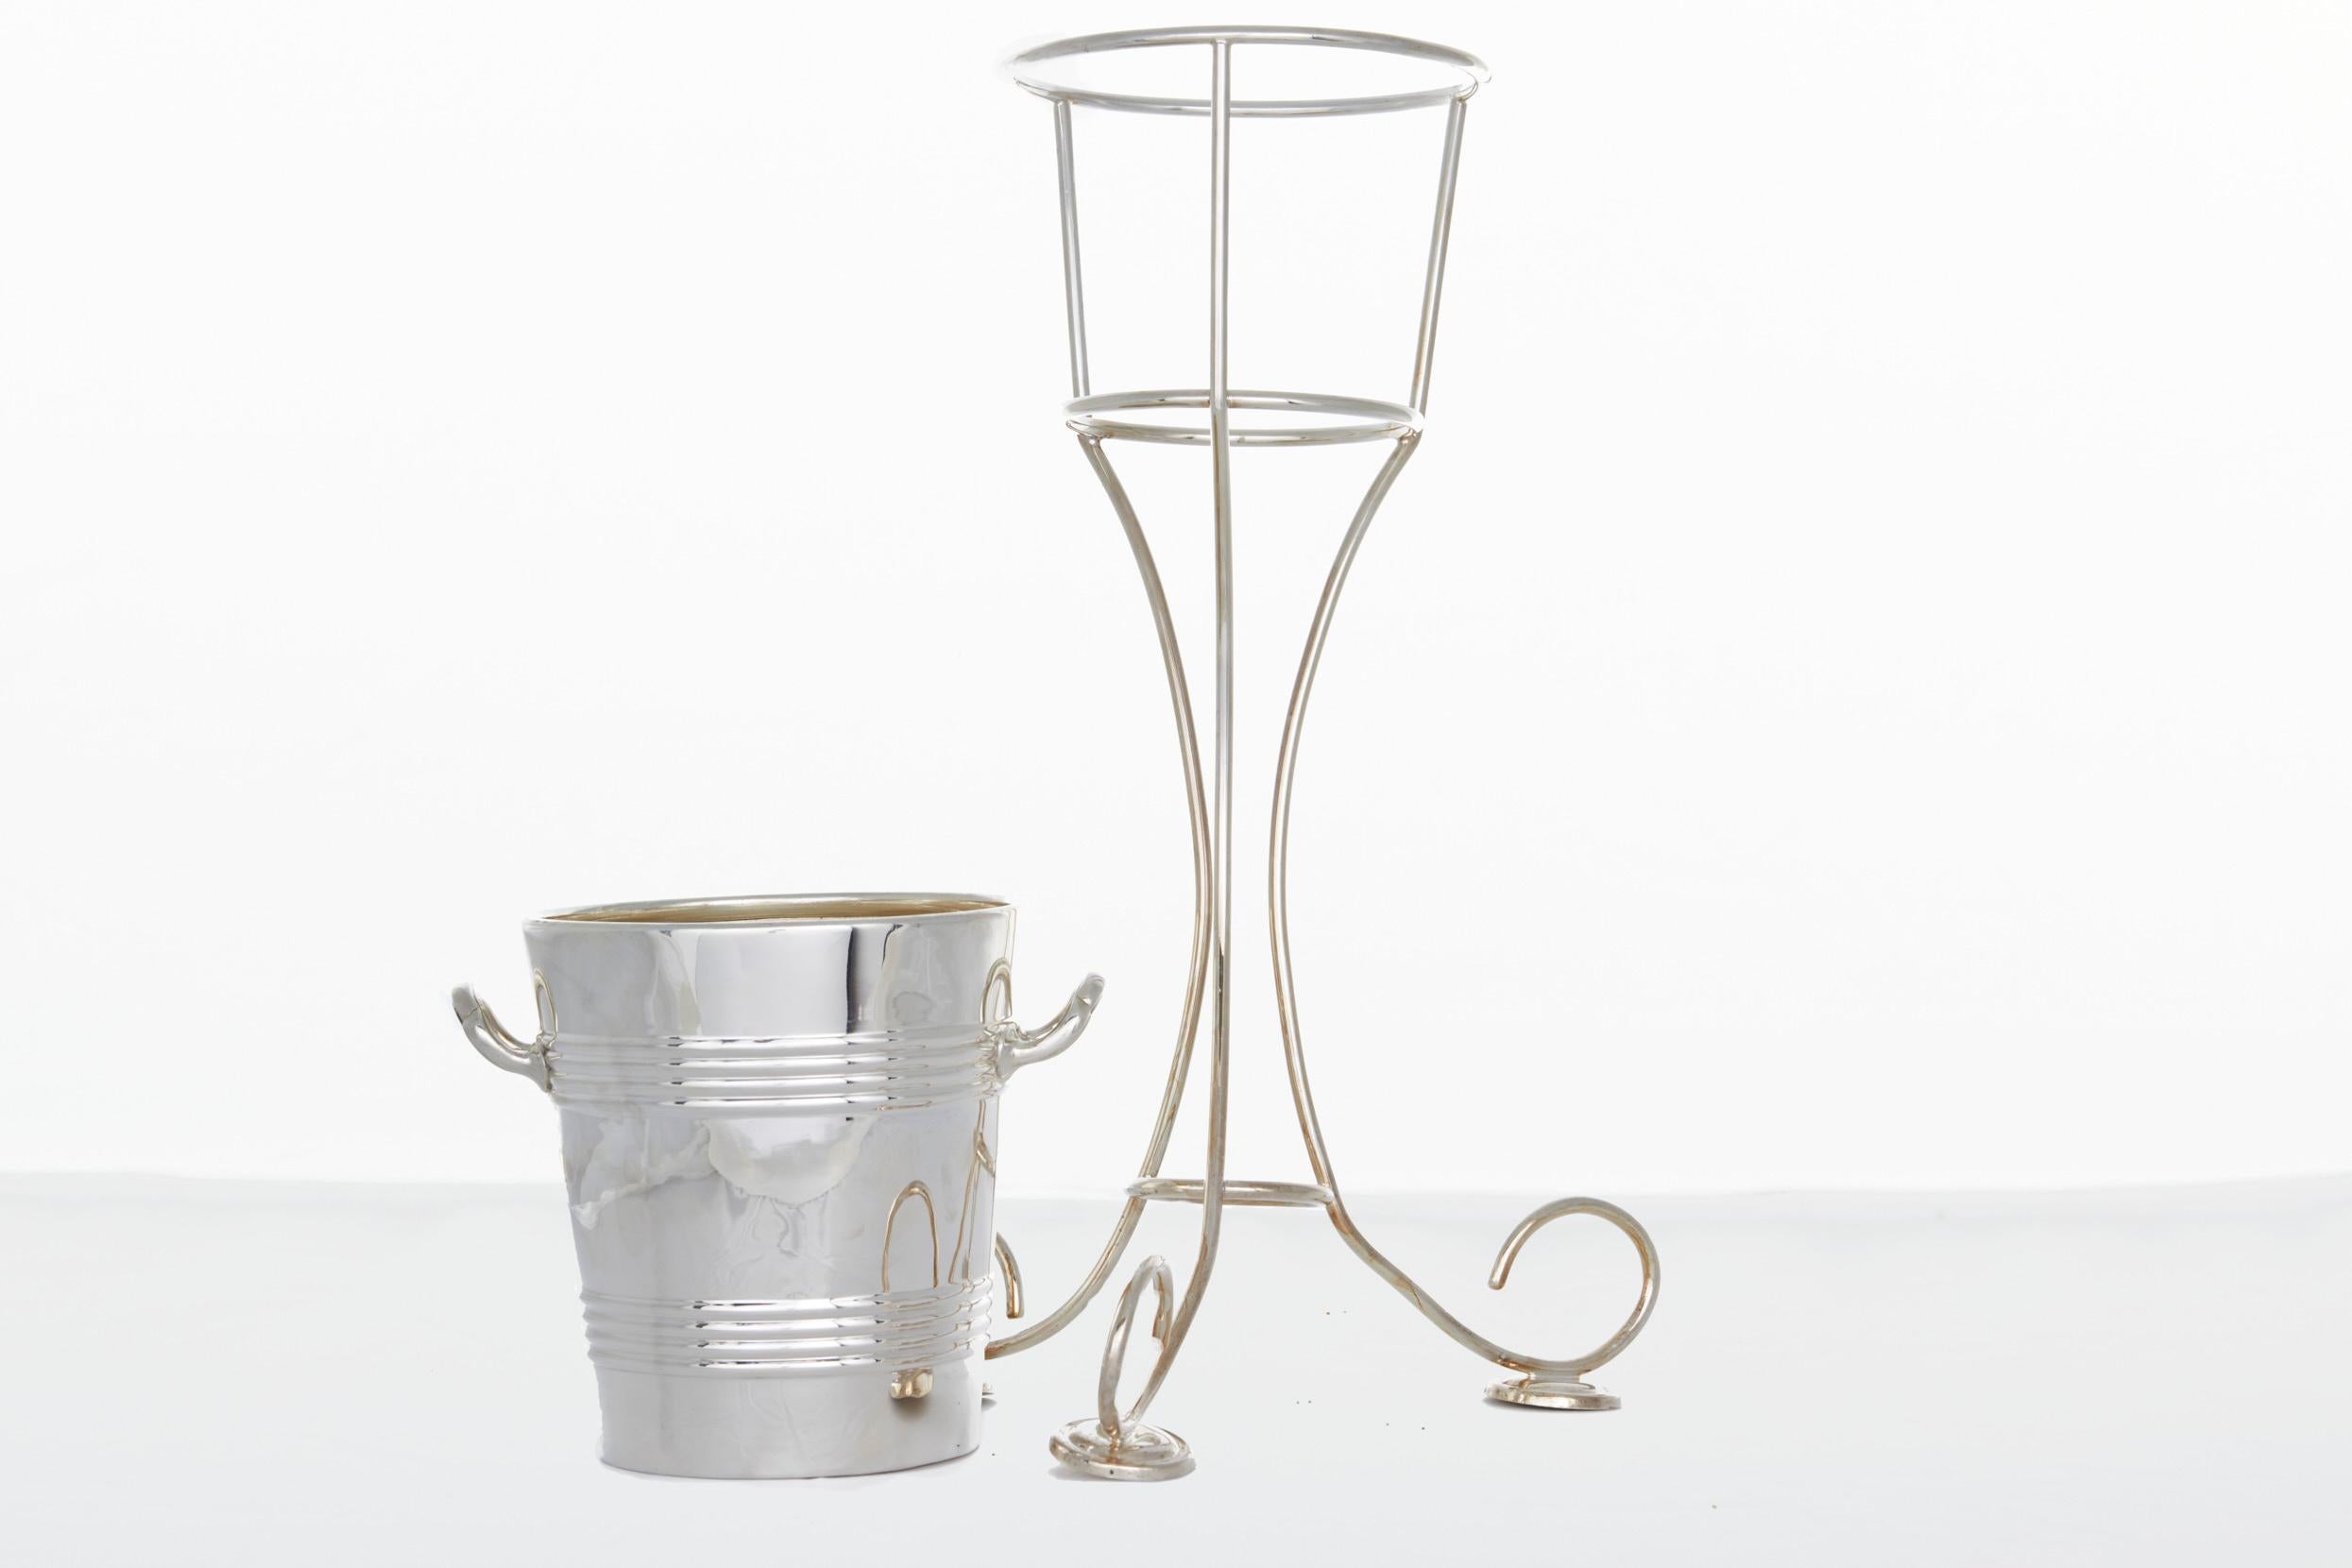 Mid 20th Century English barware / tableware Silver plated champagne bucket / wine cooler on stand . The Wine cooler / ice bucket features an arts & craft style with two side handles . The piece is in good condition . Minor wear . The holding stand